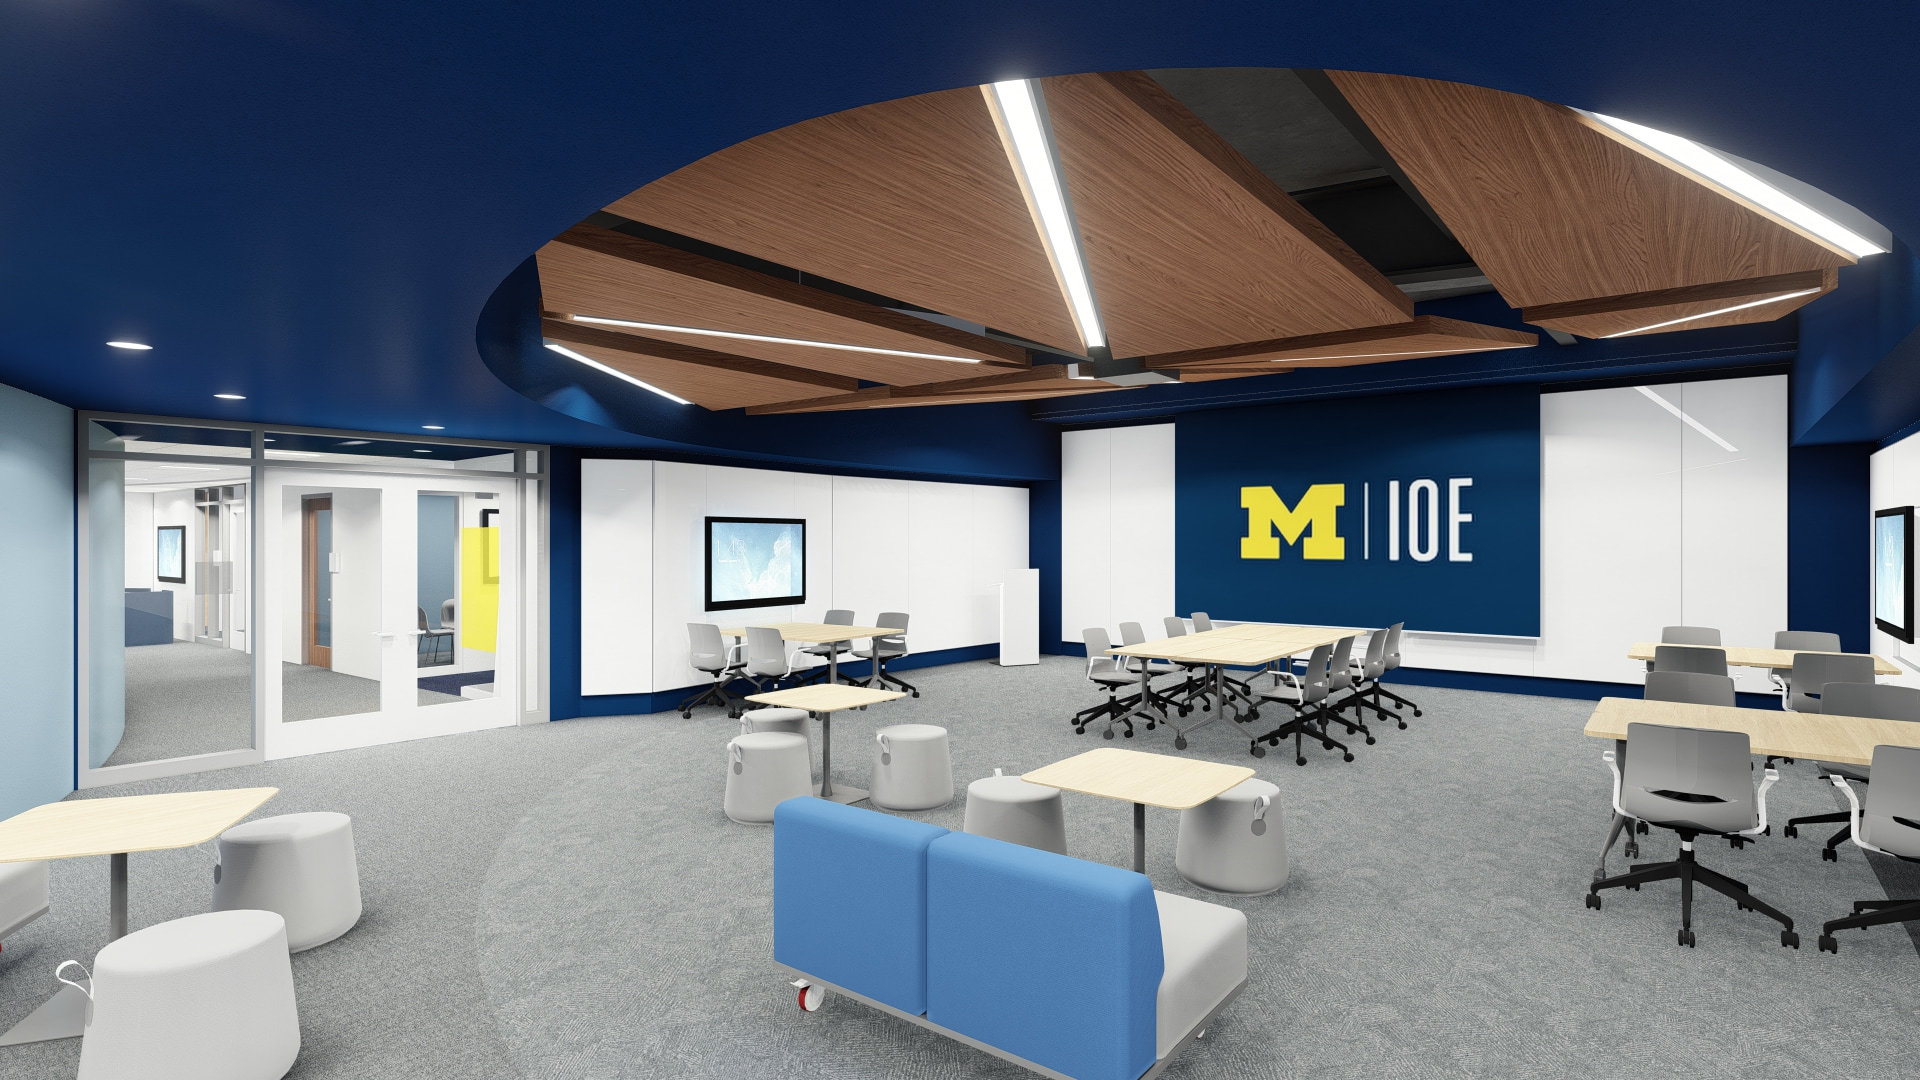 Engineered rendering of what the IOE Collaboration lab could look like